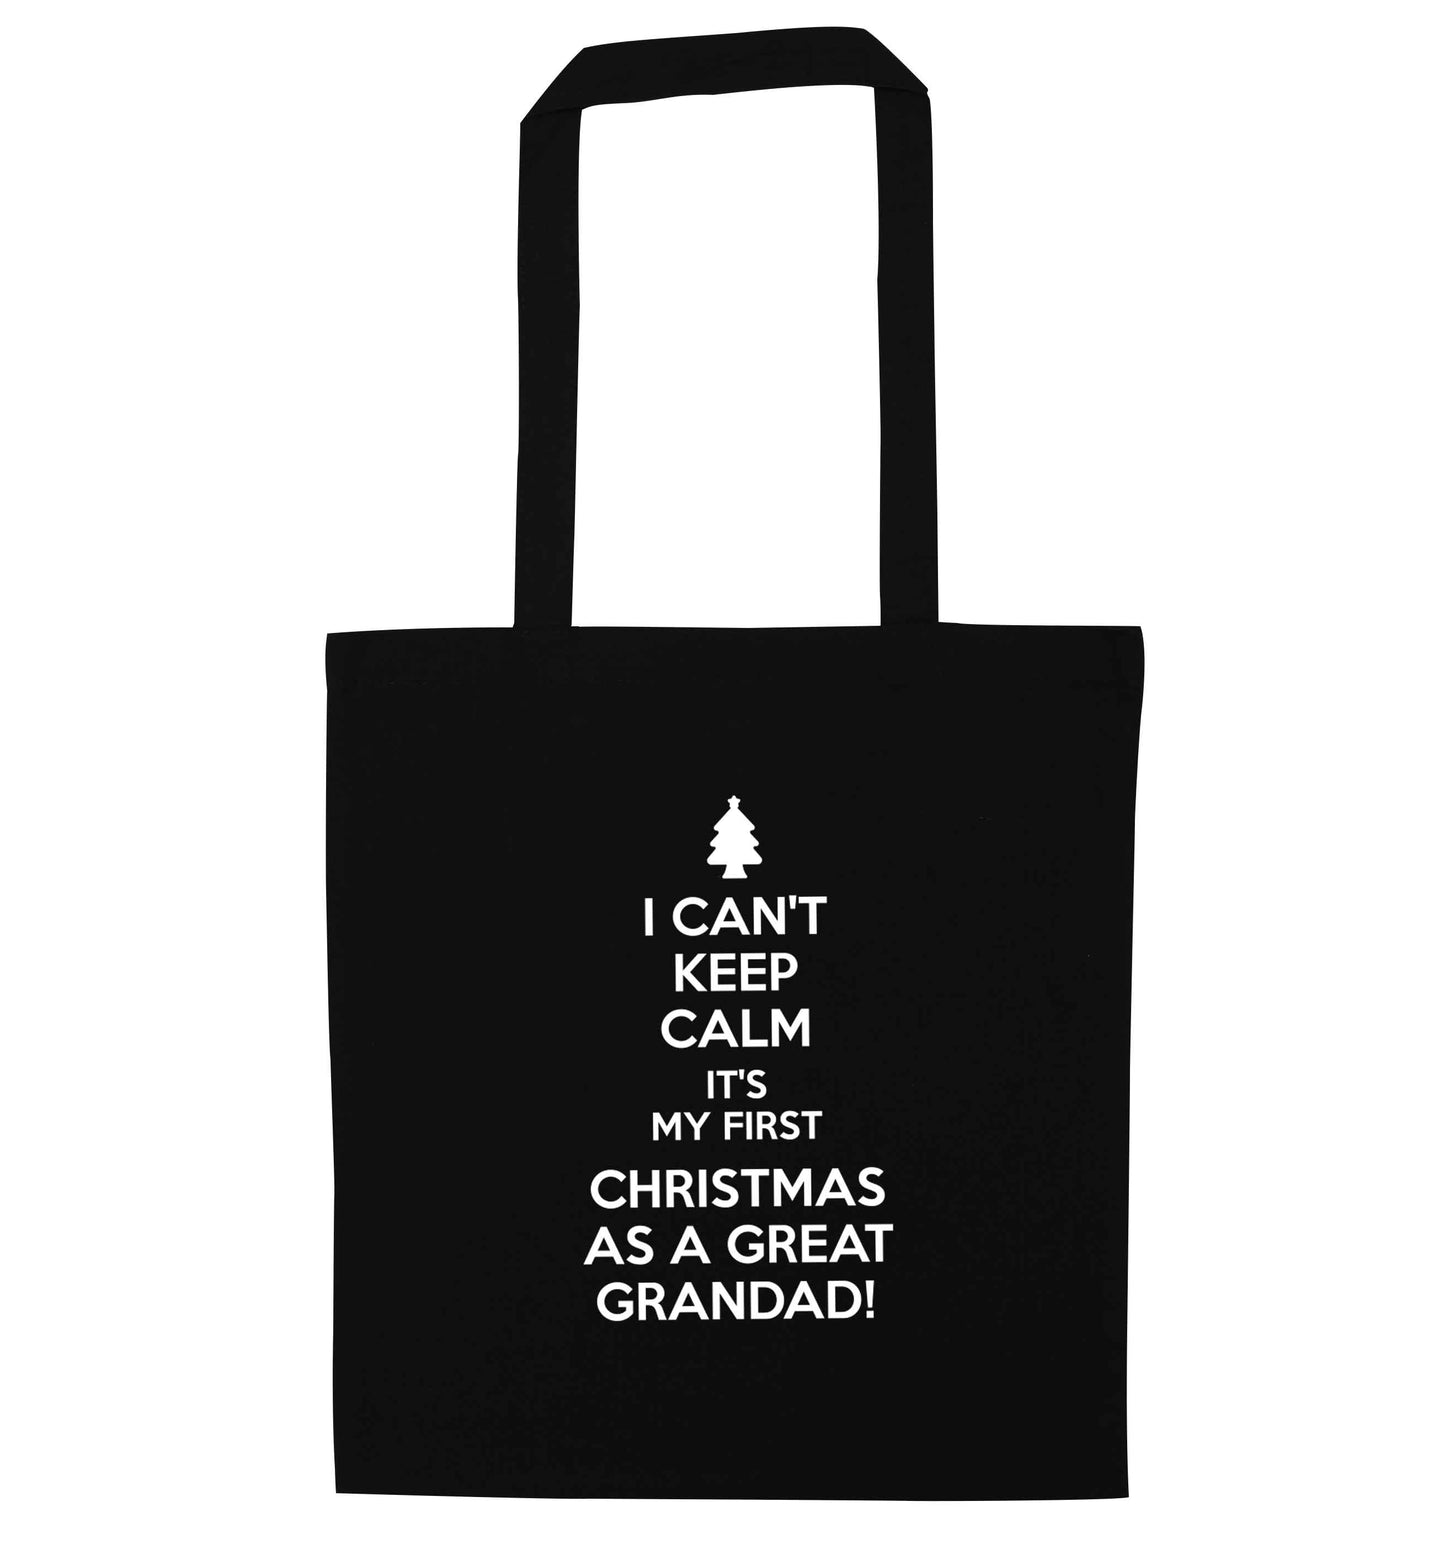 I can't keep calm it's my first Christmas as a great grandad! black tote bag